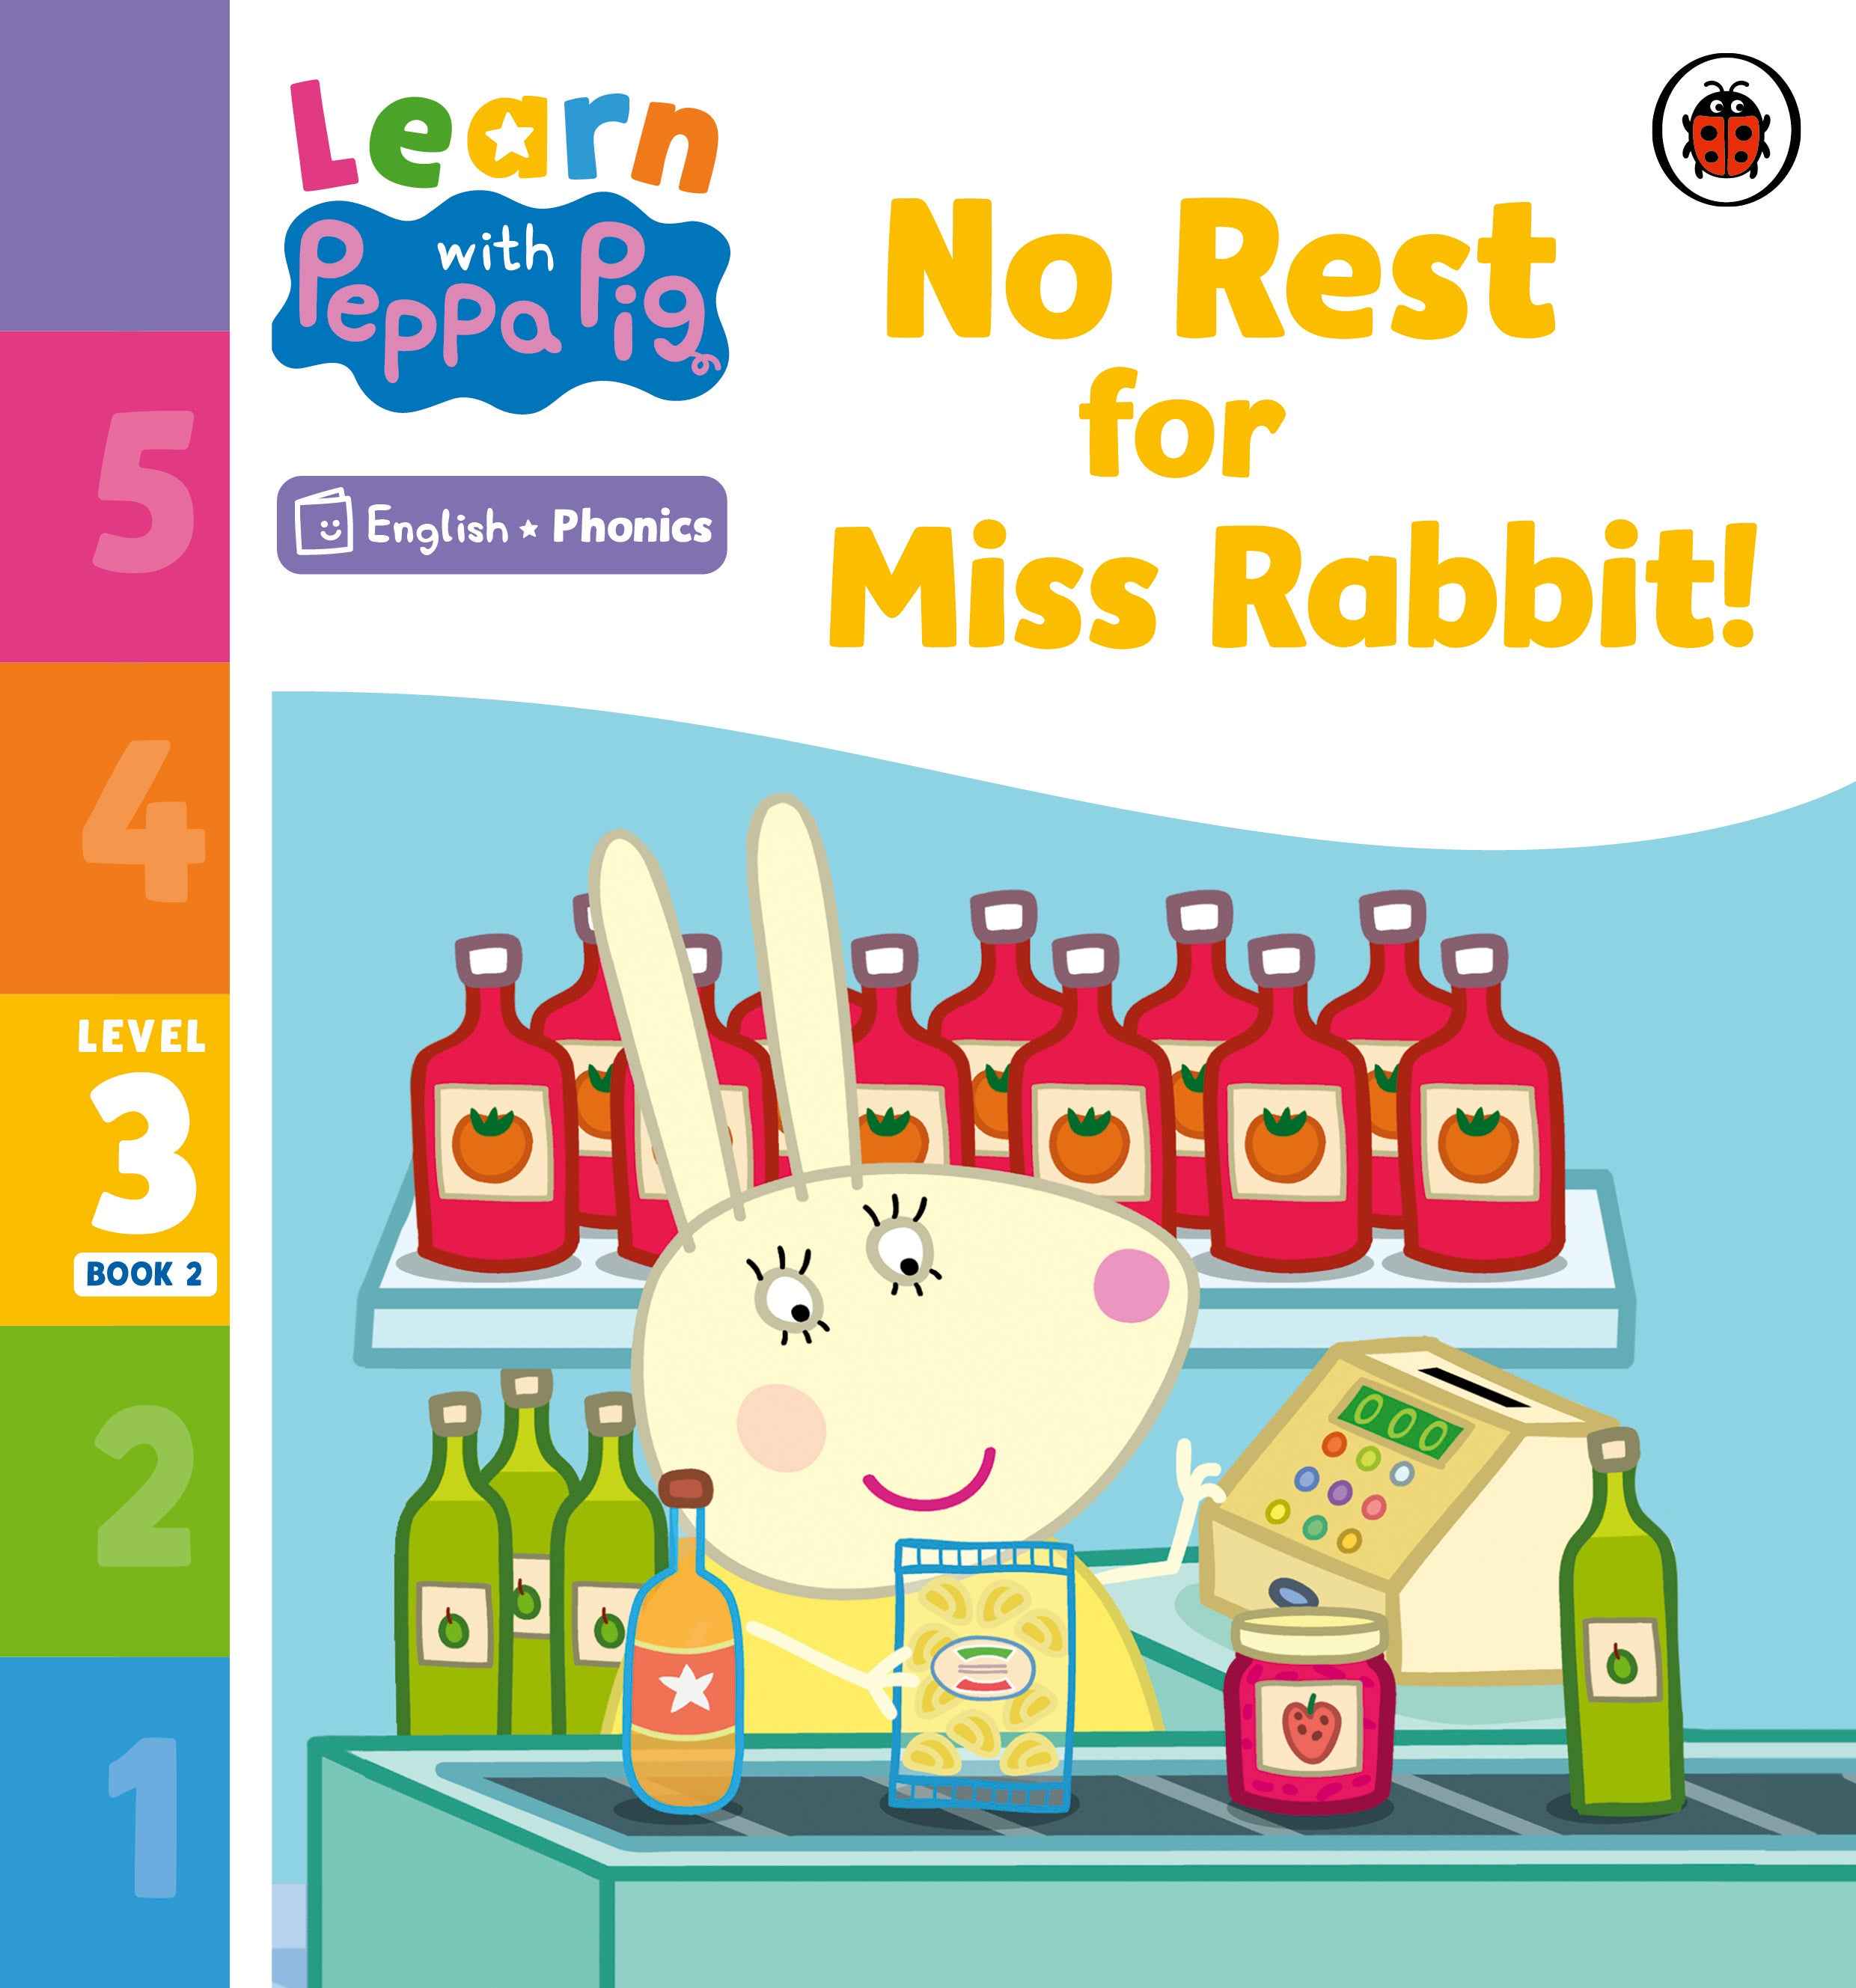 No Rest for Miss Rabbit!